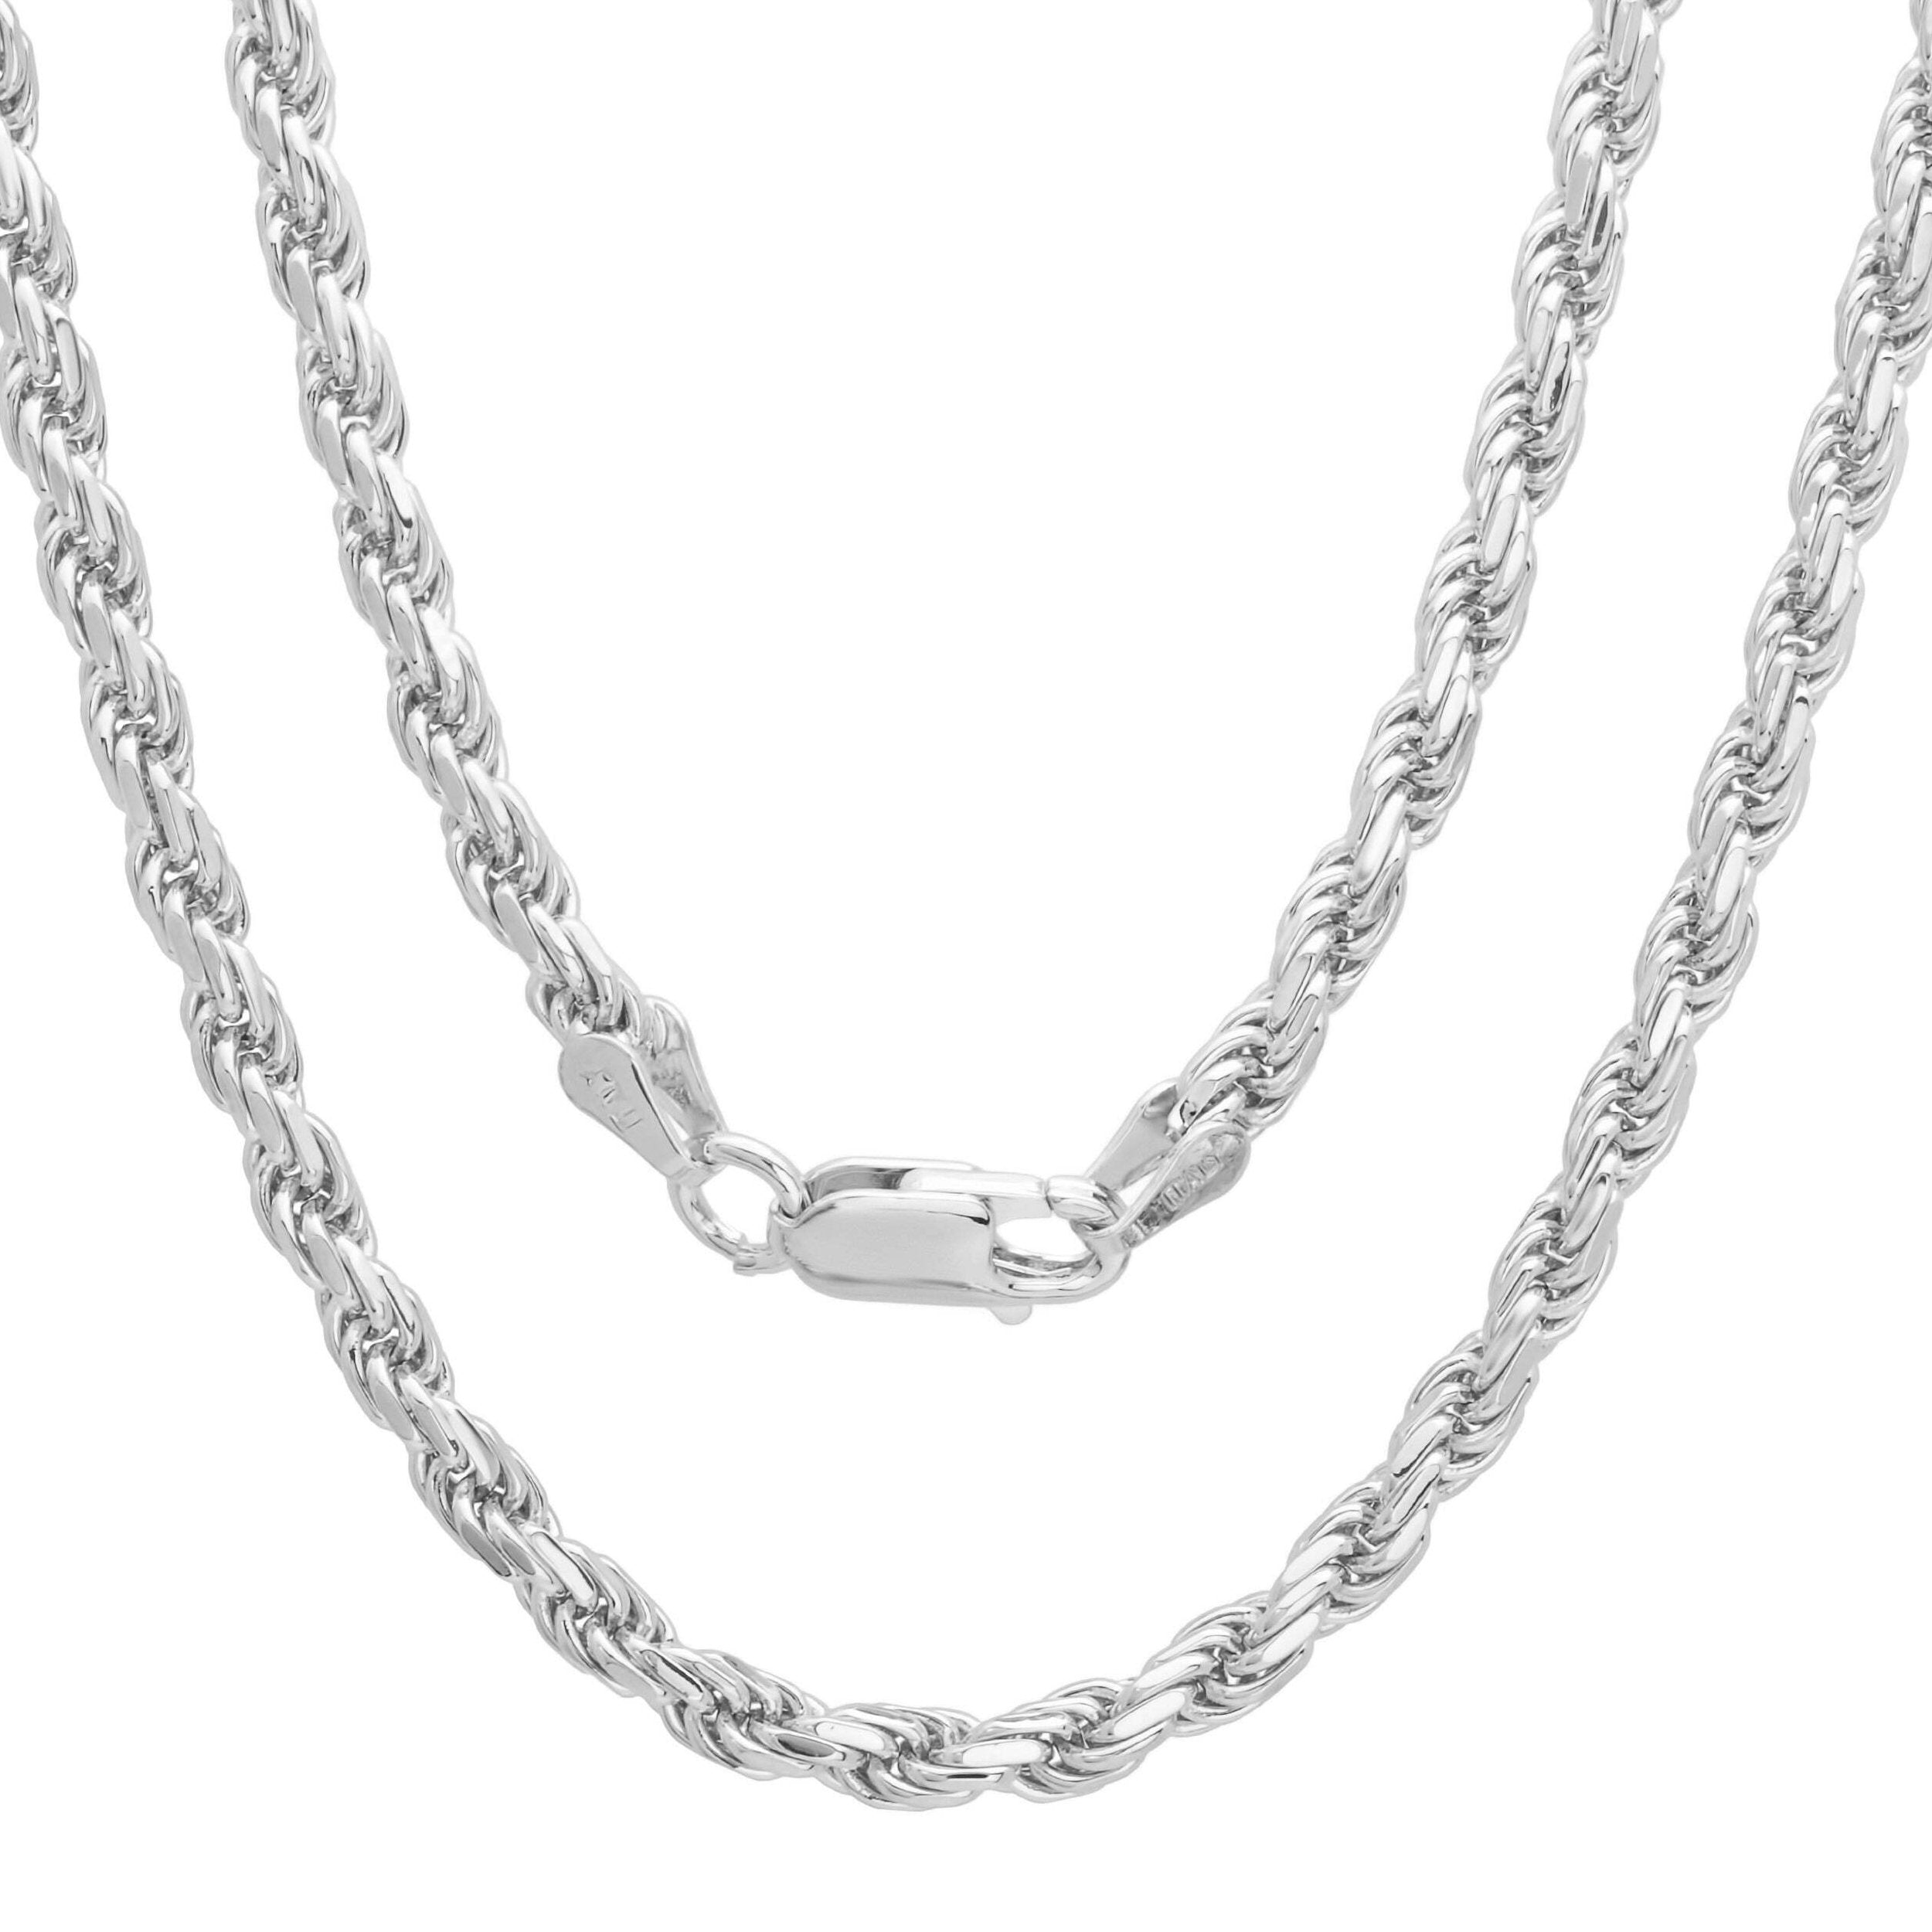 3.5MM 070 Rhodium Plated Rope Chain .925 Sterling Silver Length 9"-28" Inches